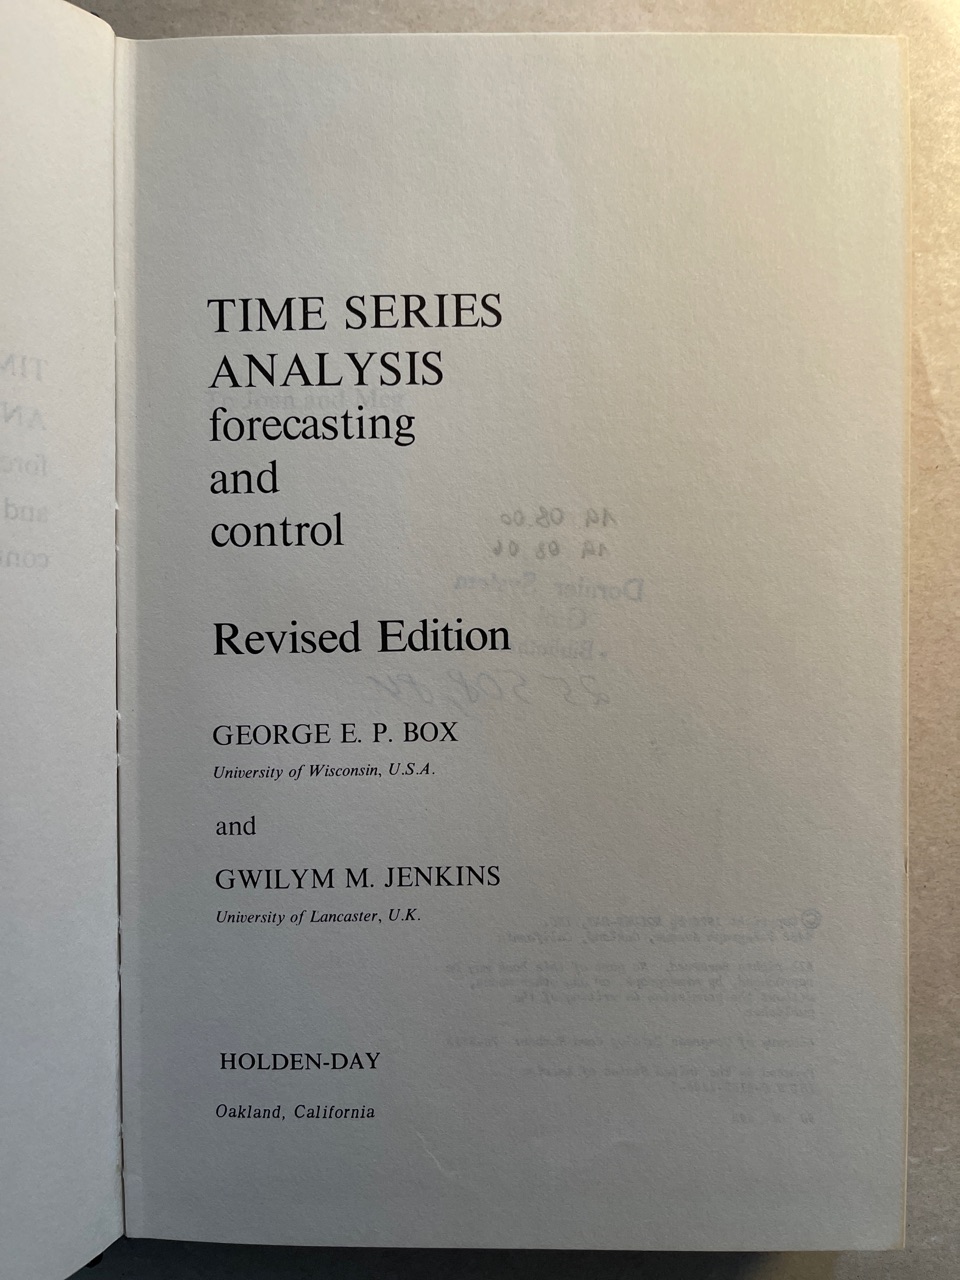 Time Series Analysis: Forecasting and Control. - Box, George E.P. and Gwilym Jenkins